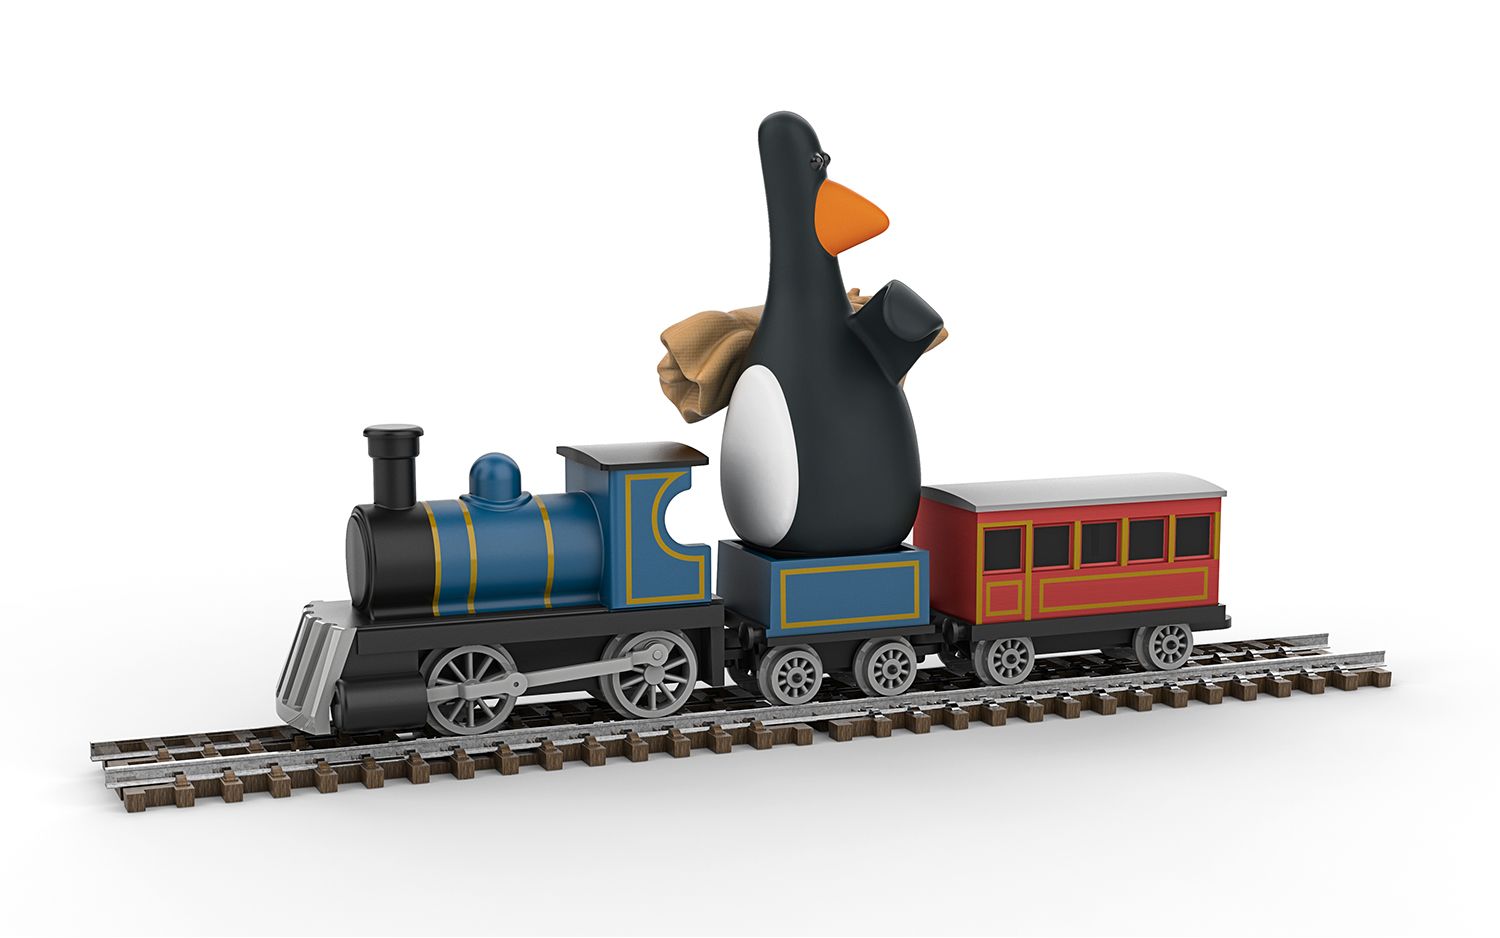 CC80602 Wallace & Gromit - The Wrong Trousers - Feathers McGraw & Locomotive